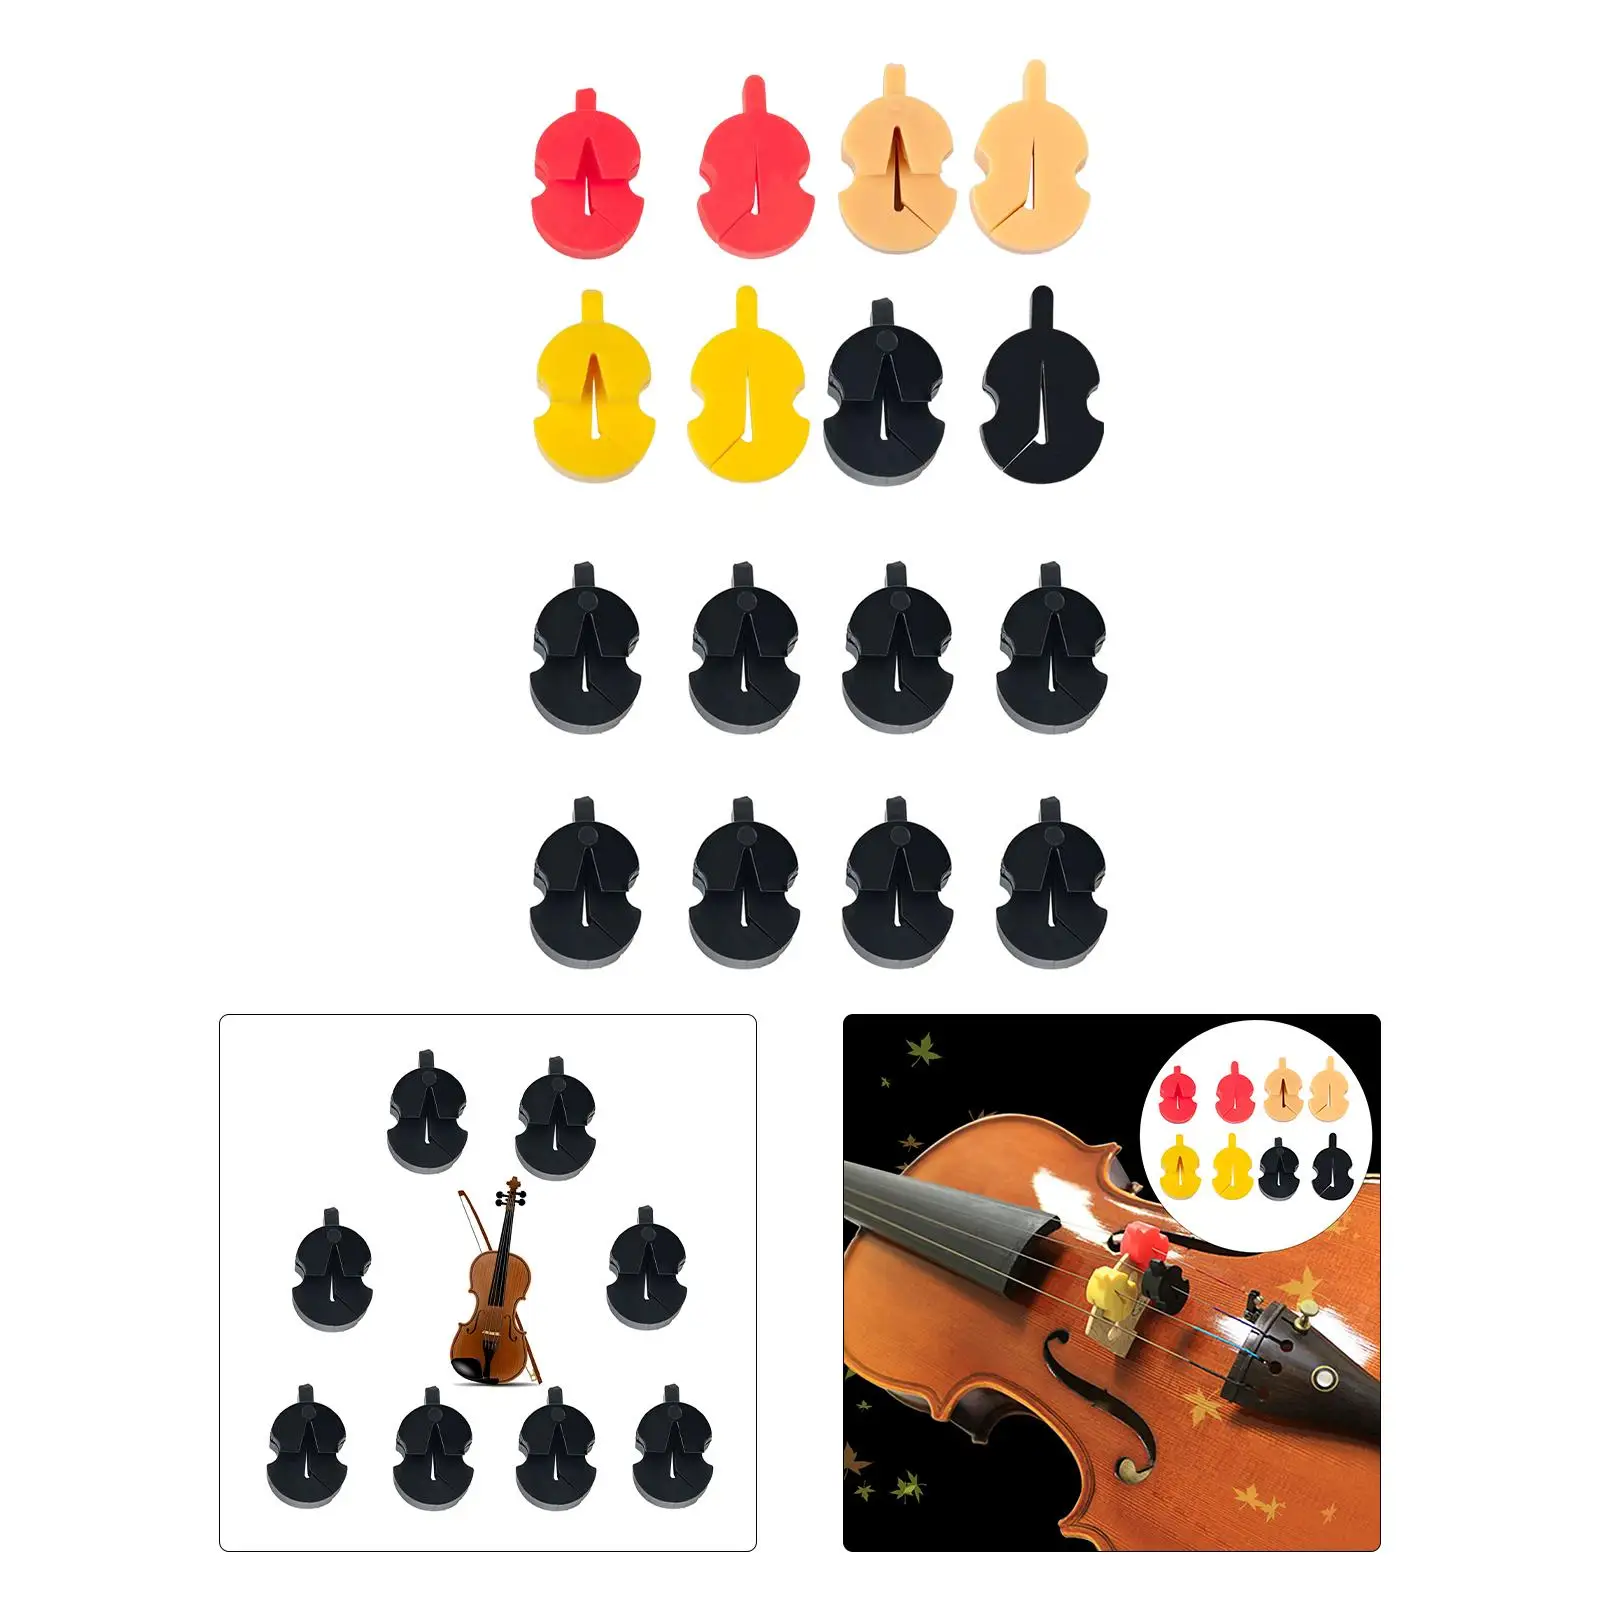 Rubber Violin Strings Dampener Silence Universal Mellowe Slience for Violin Accessories Beginner Gift Replaces